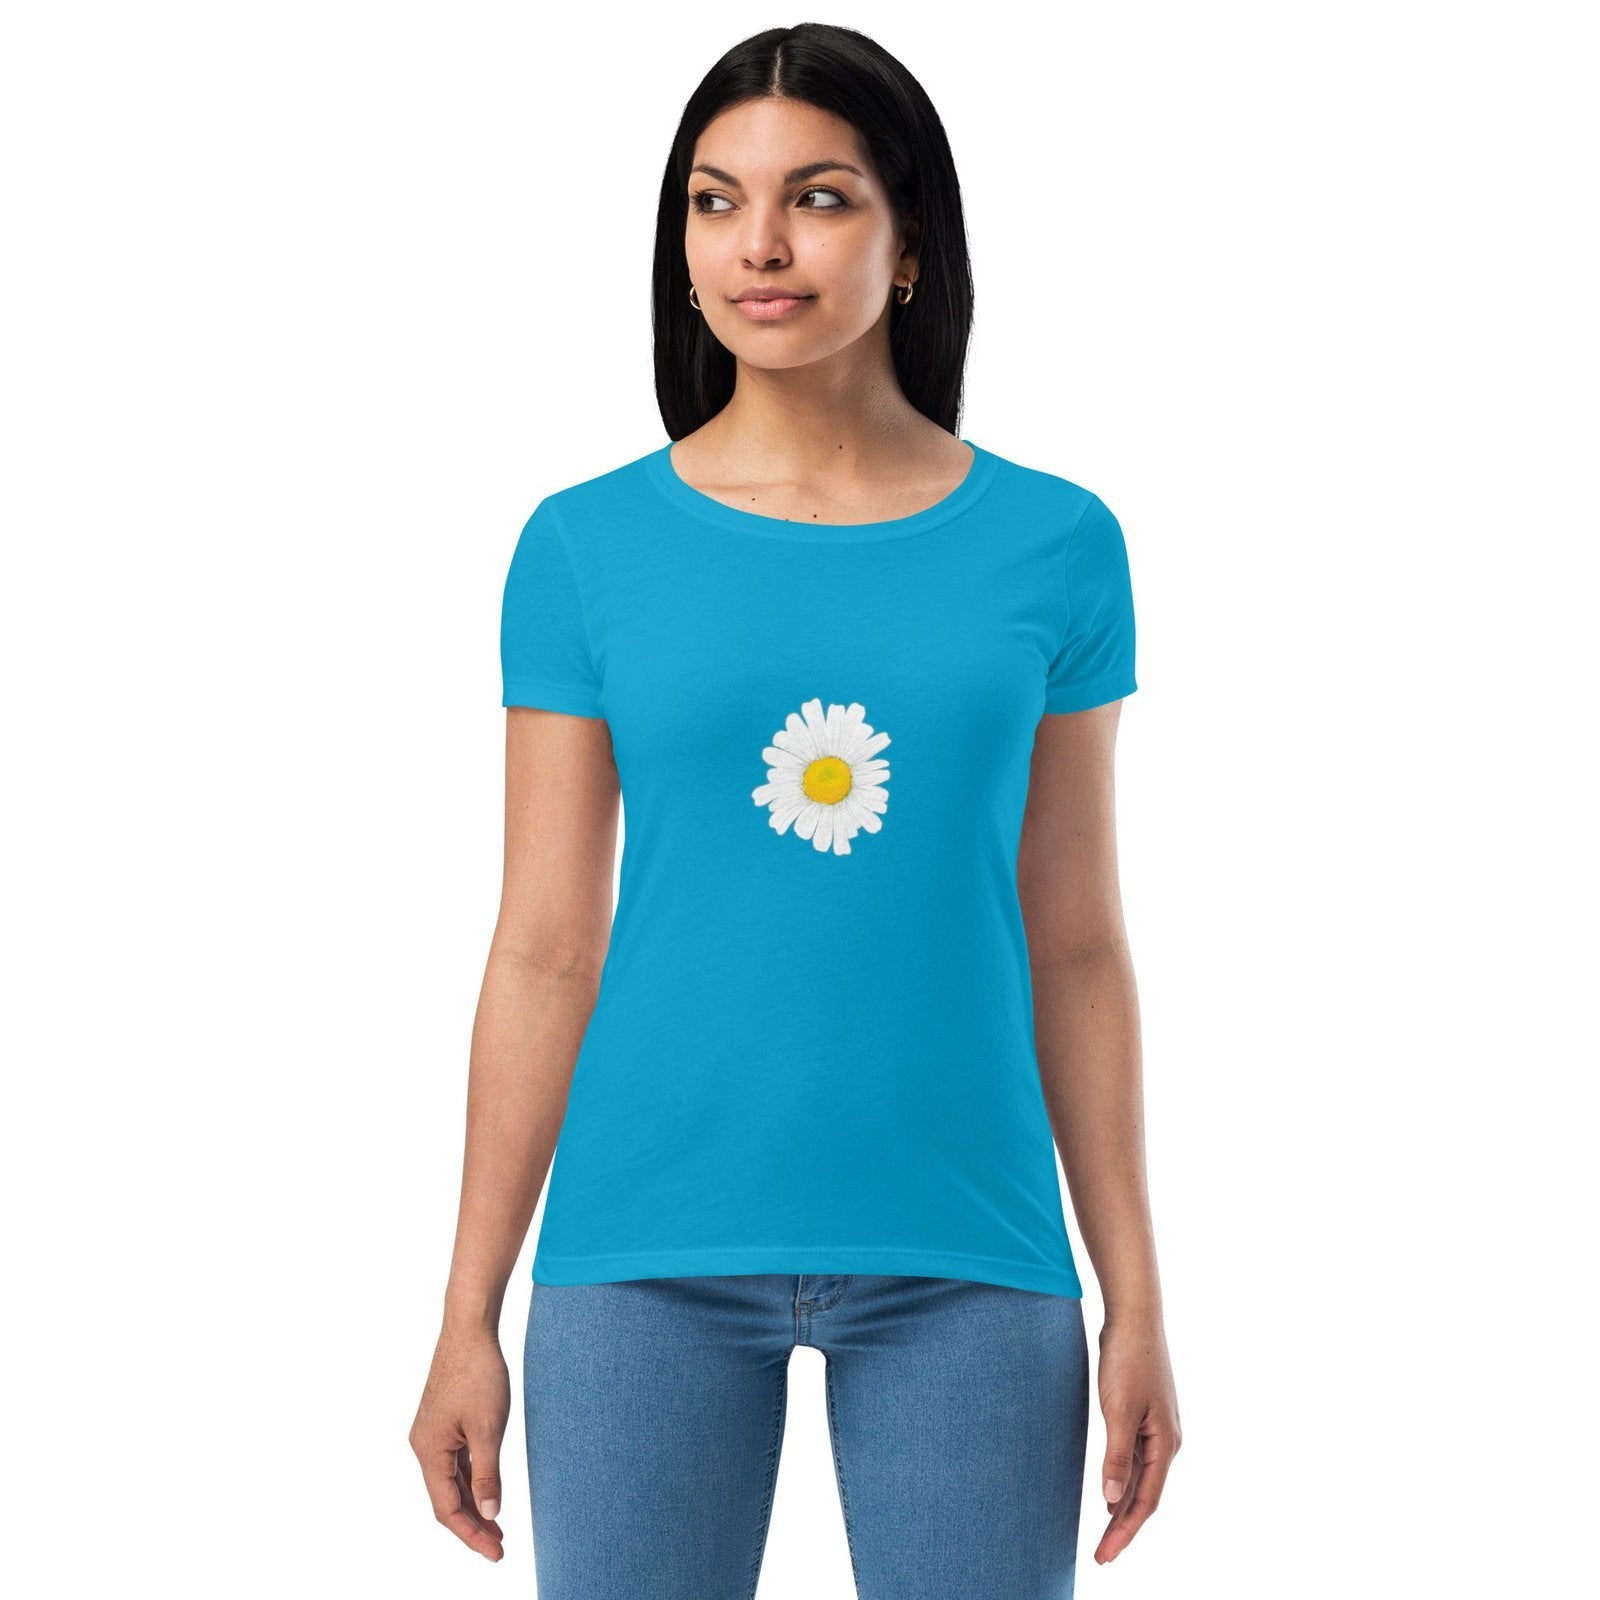 Daisy Cotton Blend Slim Fit Tee Shirts Tops Seacoast Pop Up